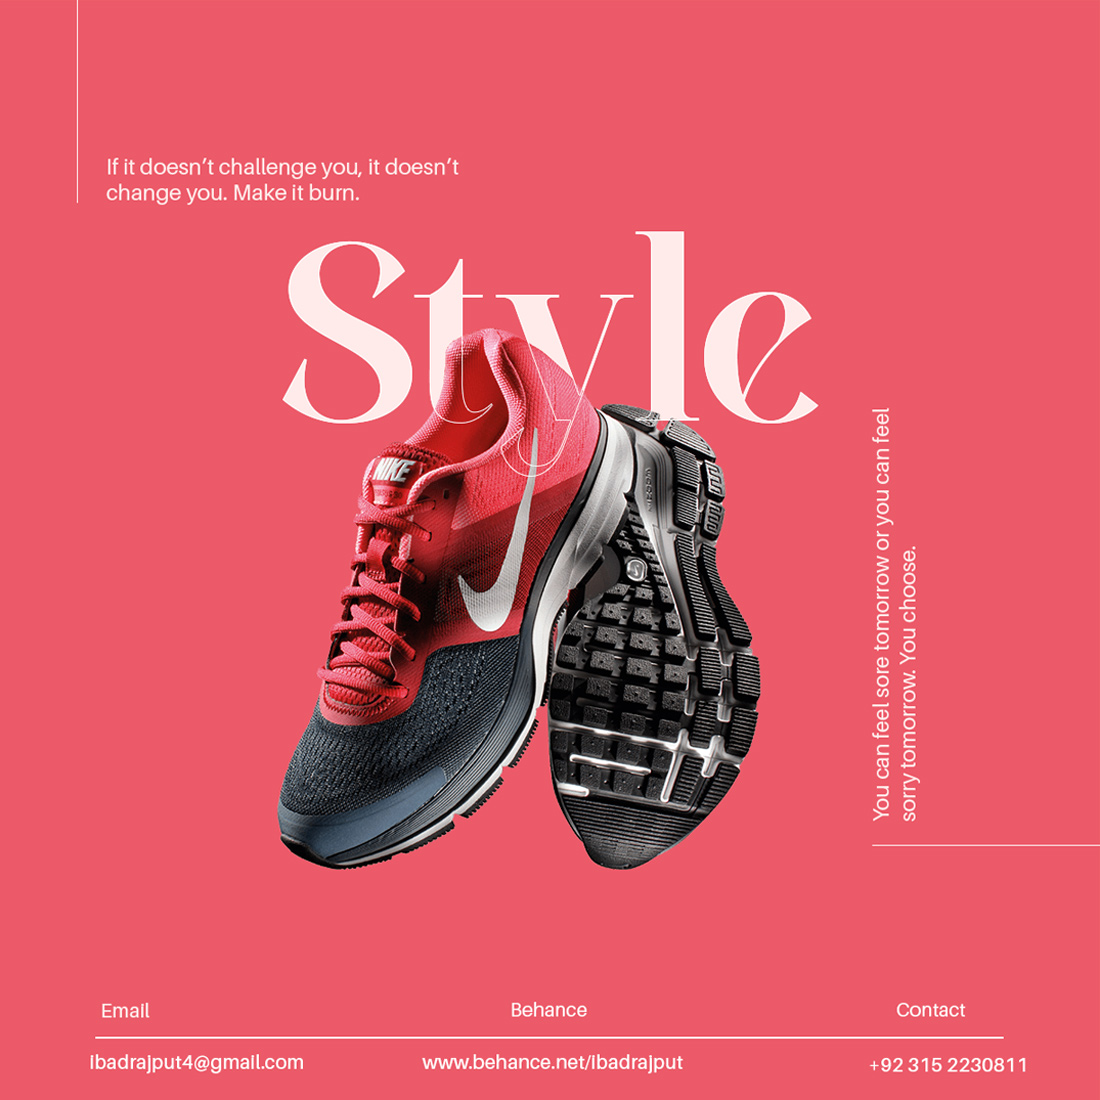 Shoes Store Product Social Media Post Design Templates facebook image.